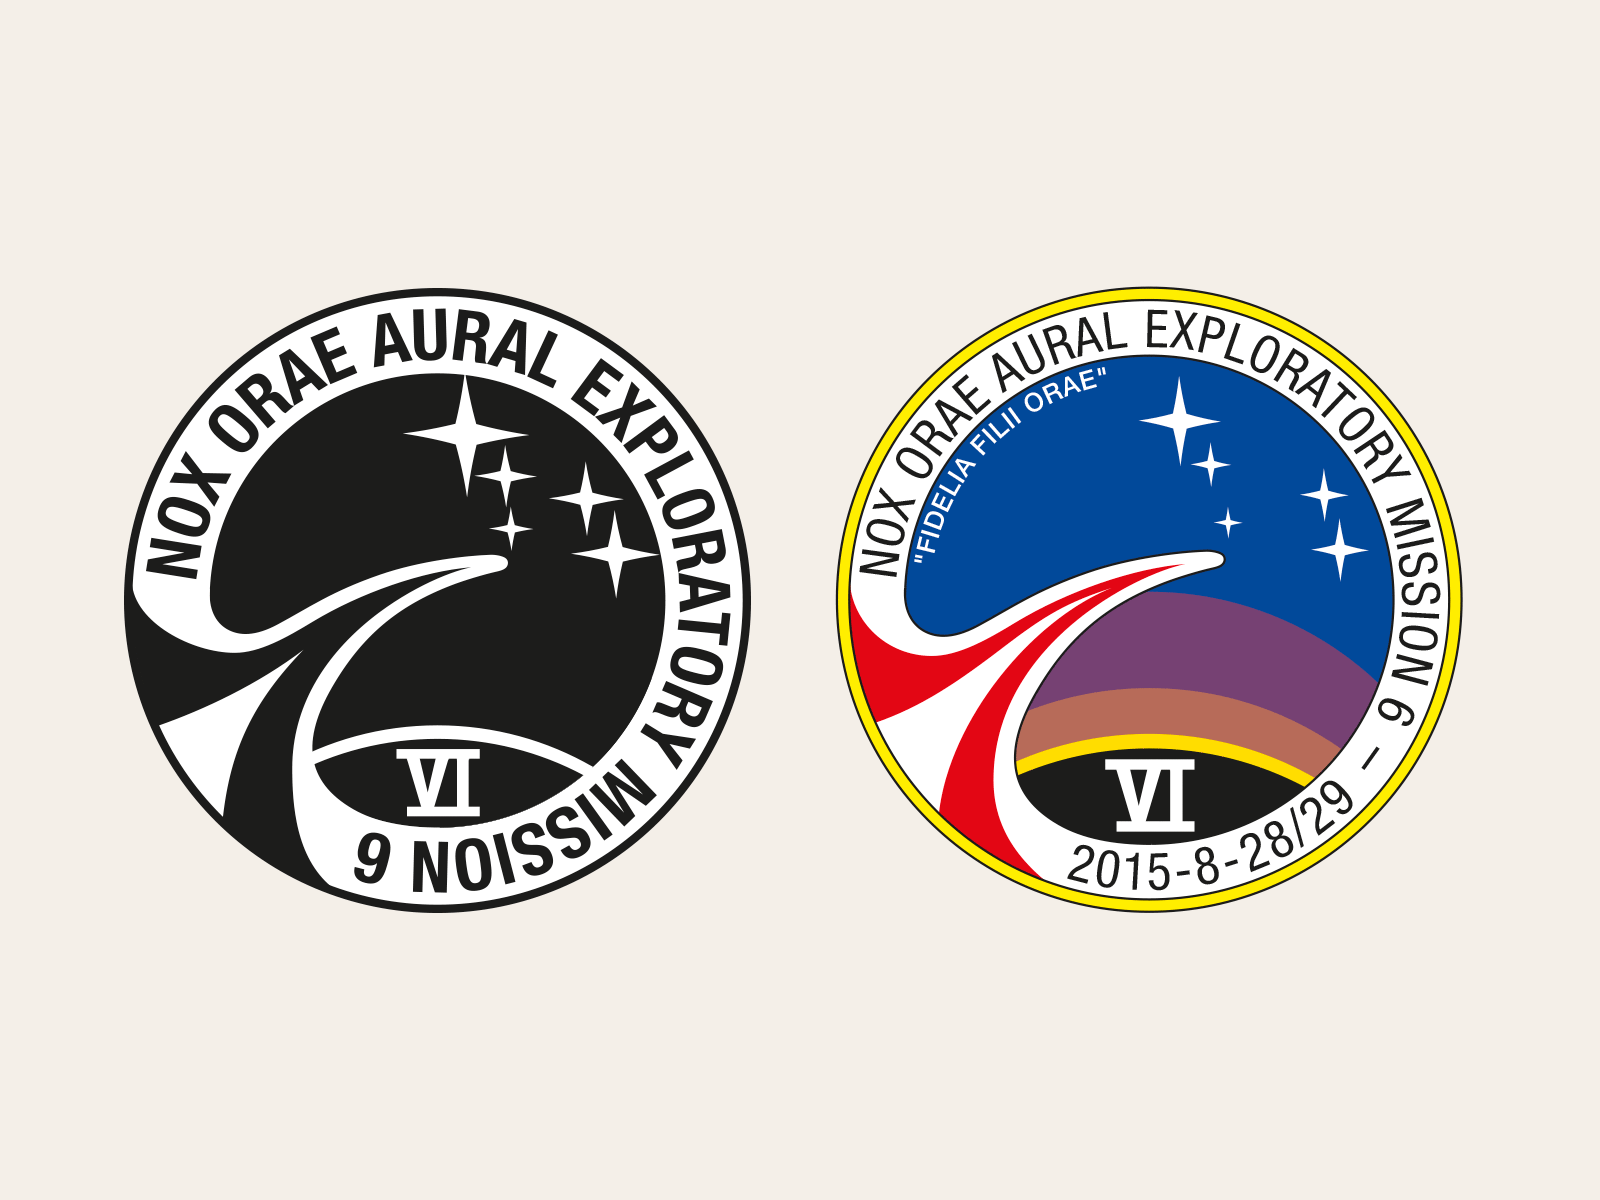 Mission patch adaptations | © AG